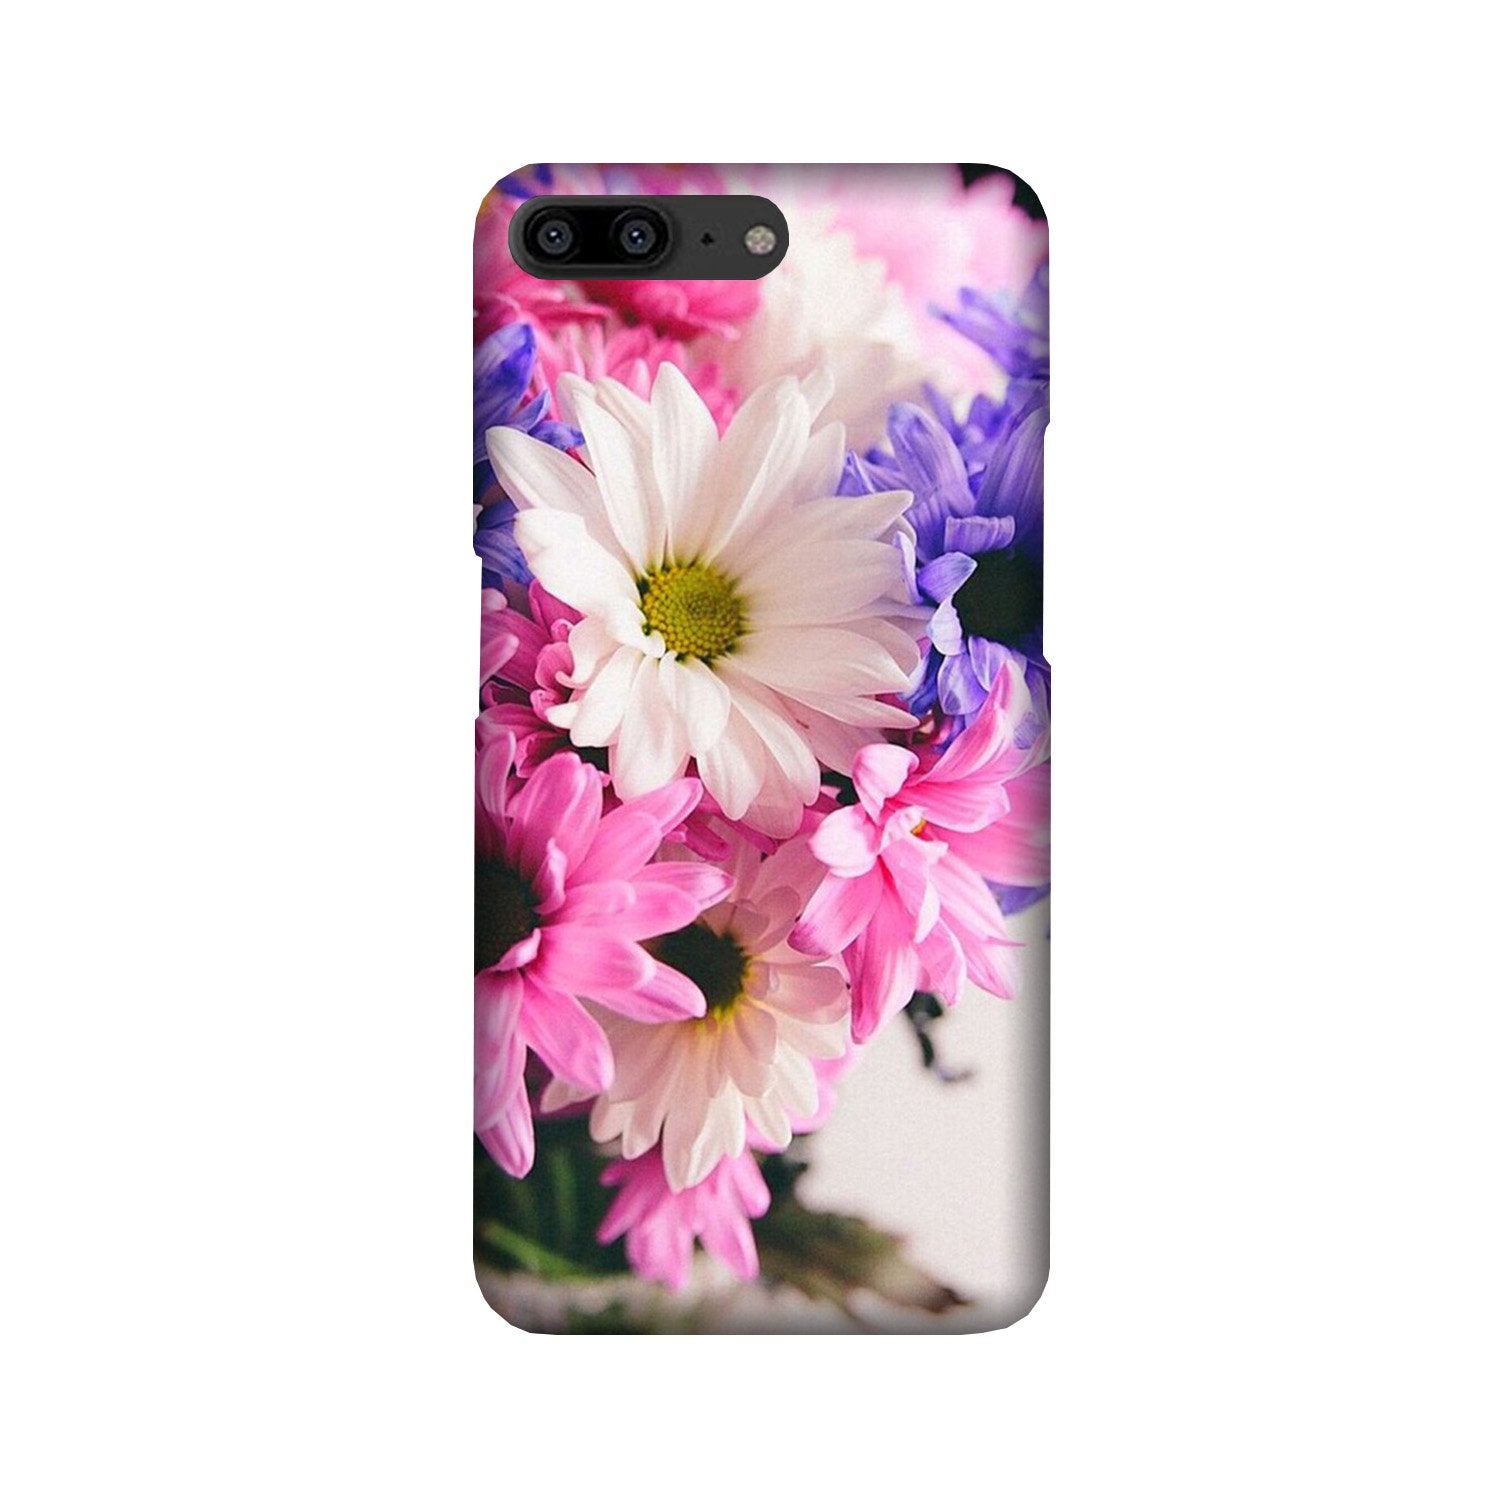 Coloful Daisy Case for OnePlus 5